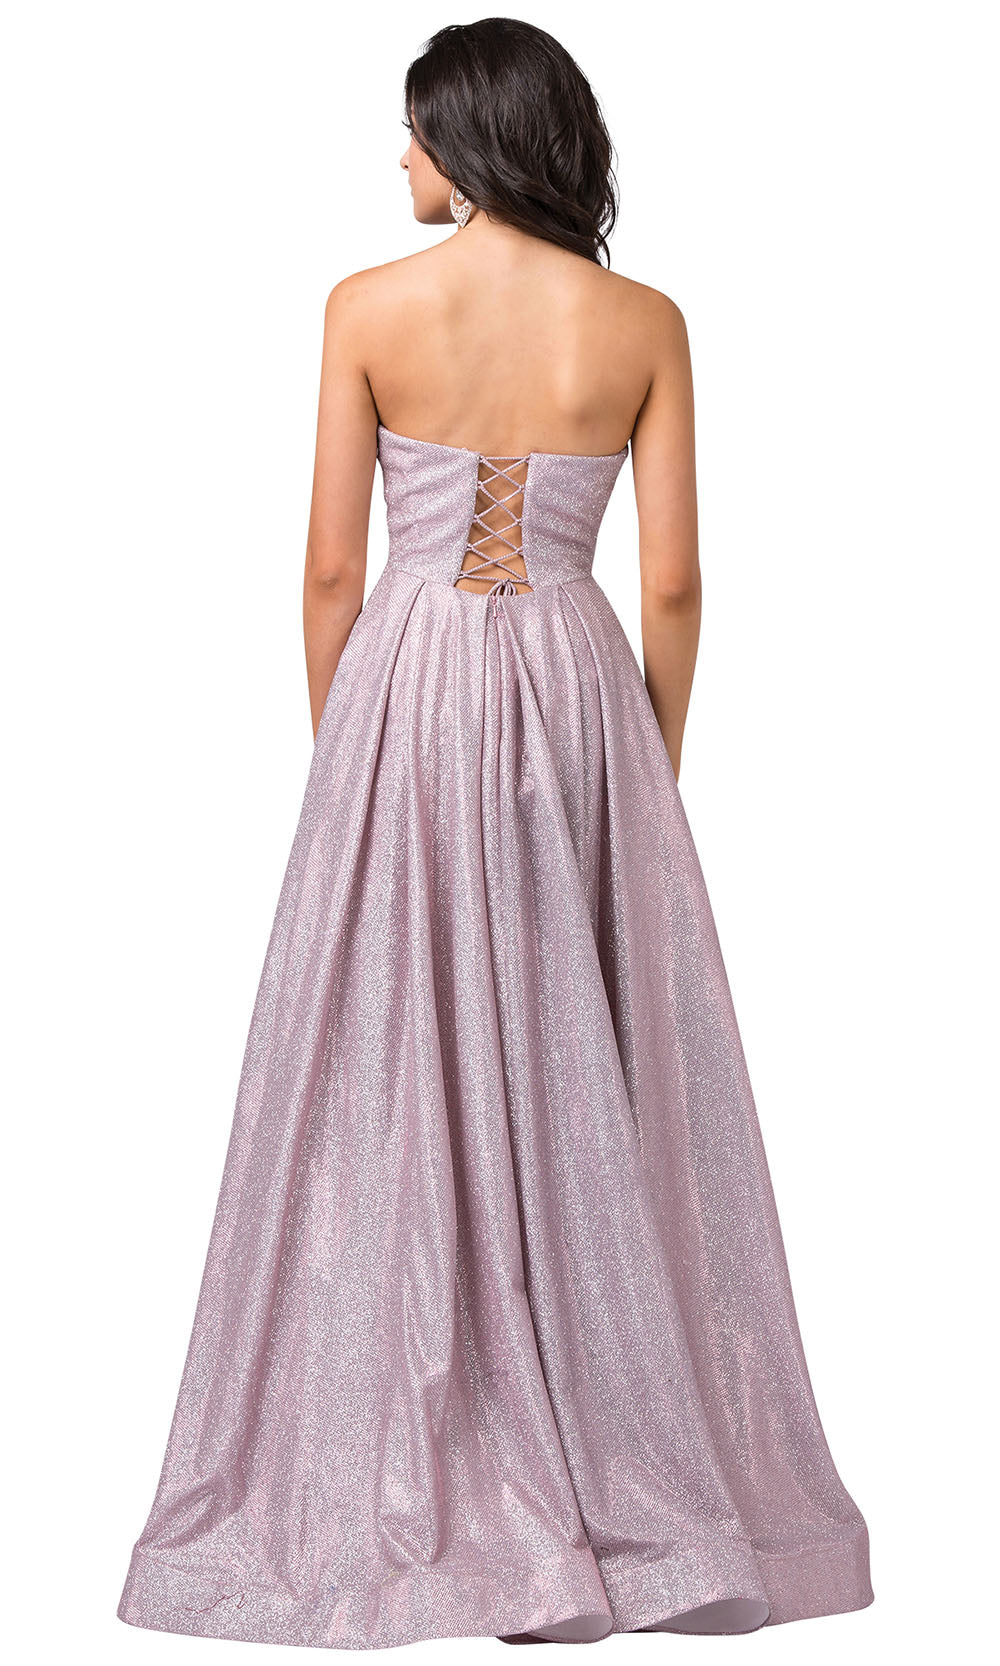 Dancing Queen - 2651 Strapless Shimmer Metallic A-Line Gown In Pink